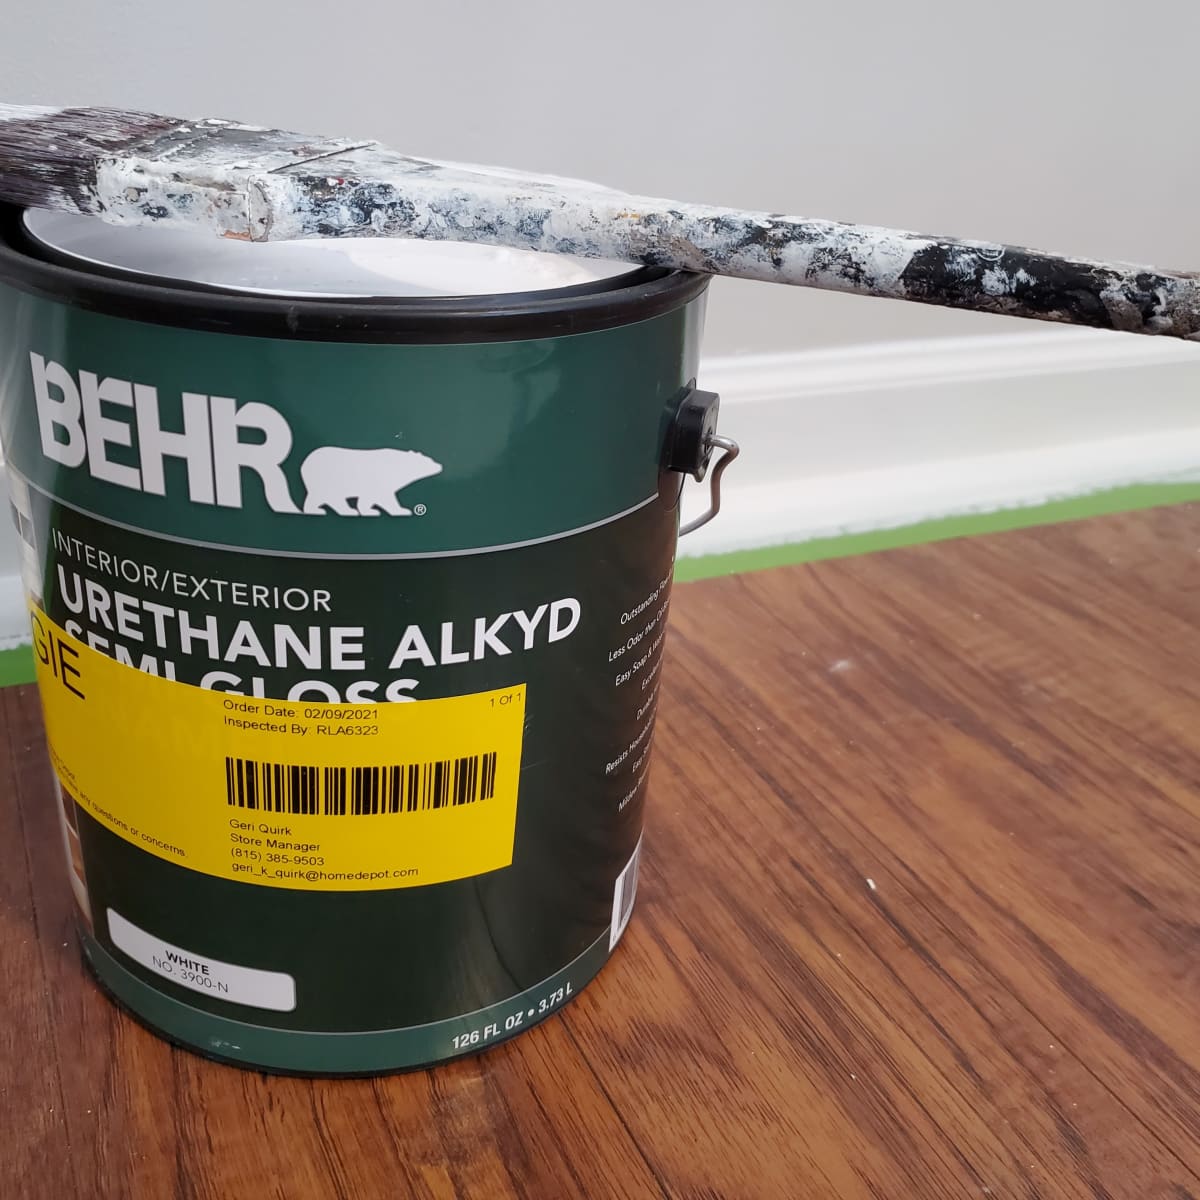 Specialty Alkyd Semi-Gloss Enamel Paints for Your Project